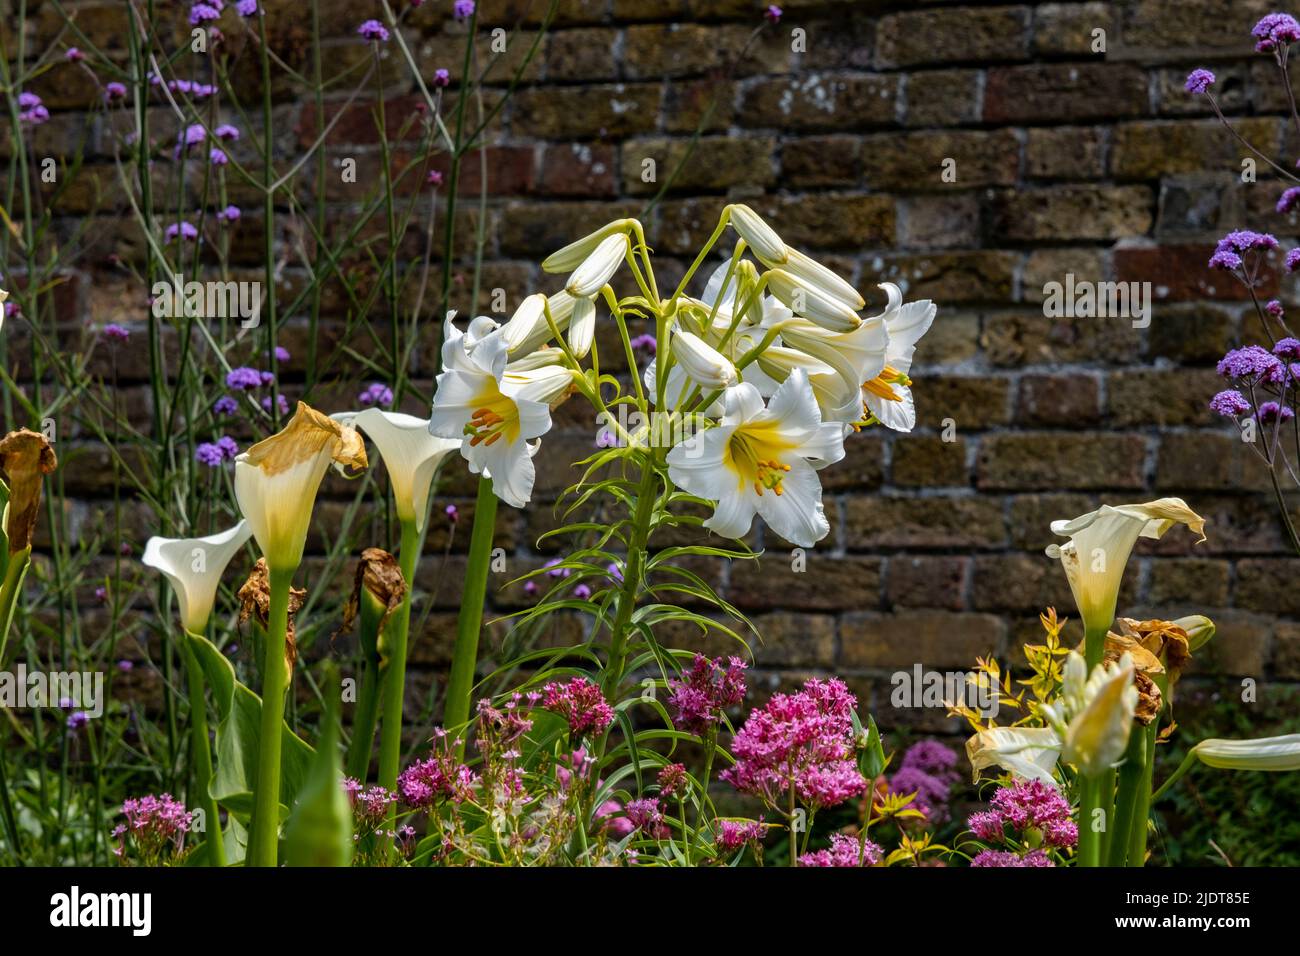 Royal lily (also known as Regal lily and Kings lily) flowers in a walled garden Stock Photo